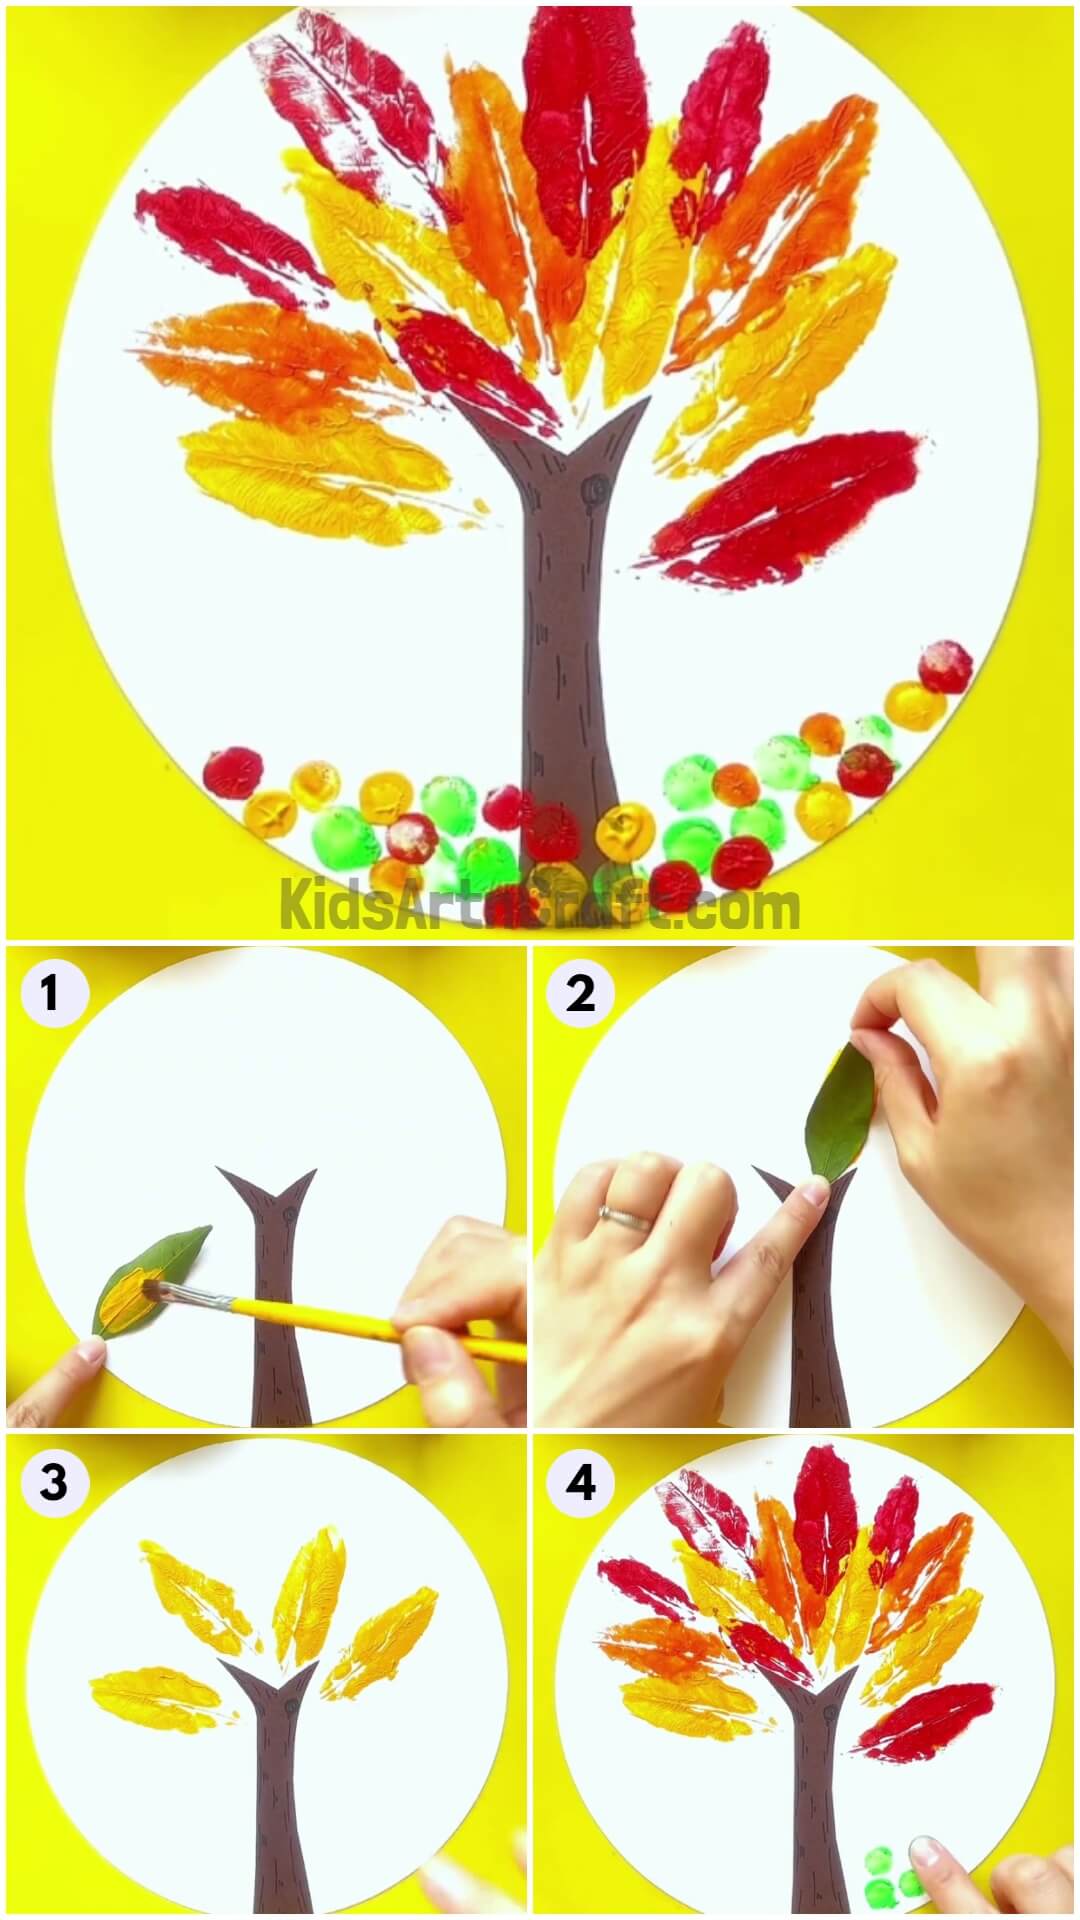 Beautiful Tree Painting Using Leaf Impression Step-by-step Tutorial For Kids